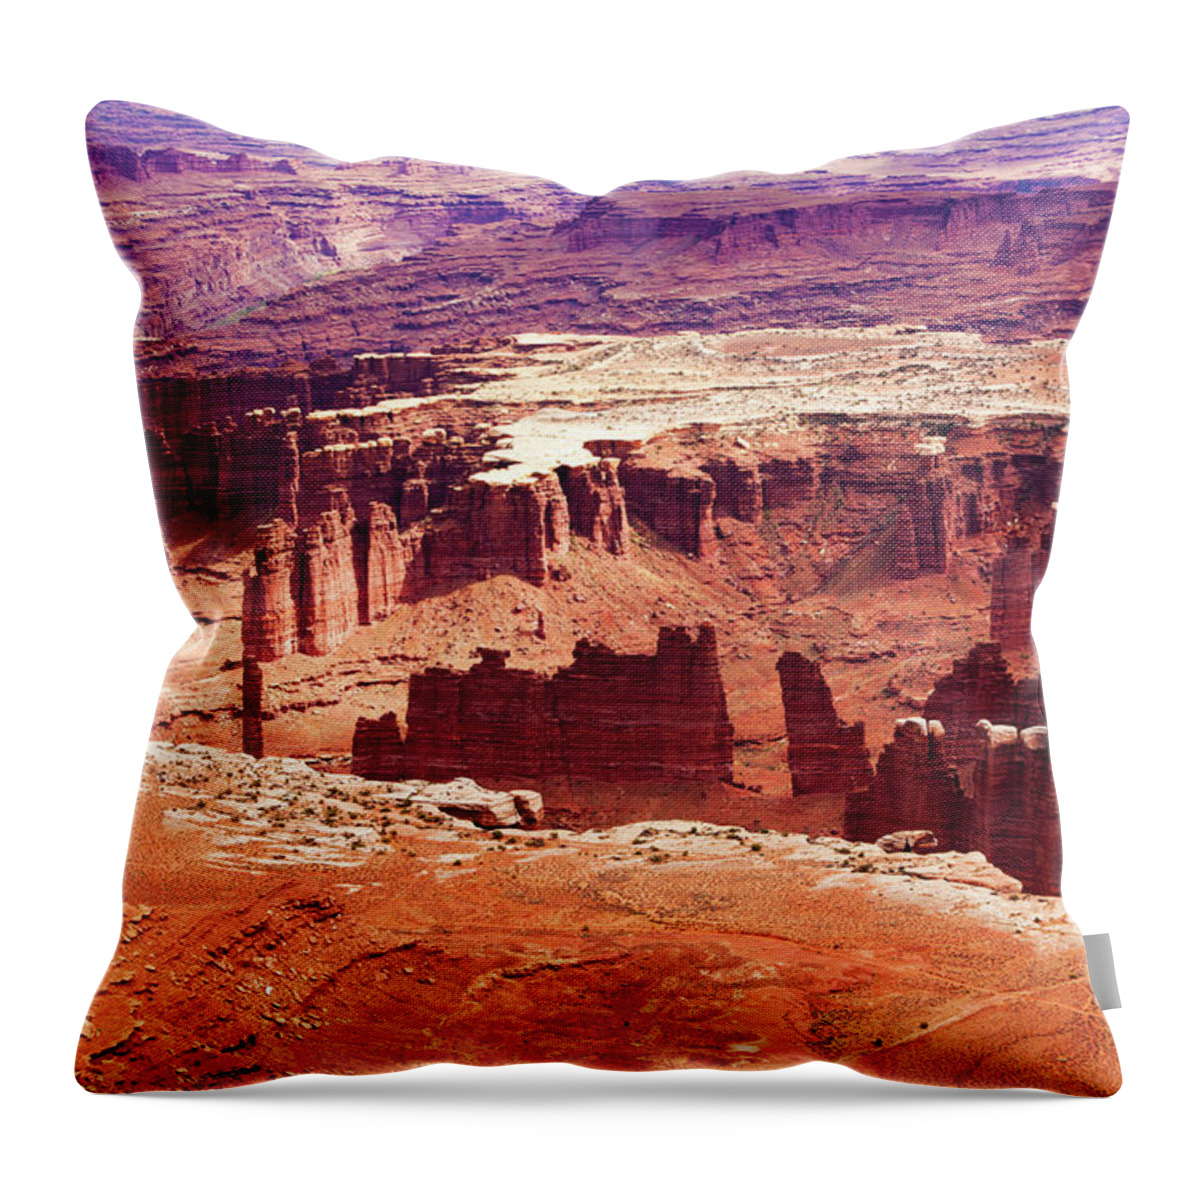 Shadow Throw Pillow featuring the photograph Canyonlands National Park, Colorado by Lucynakoch